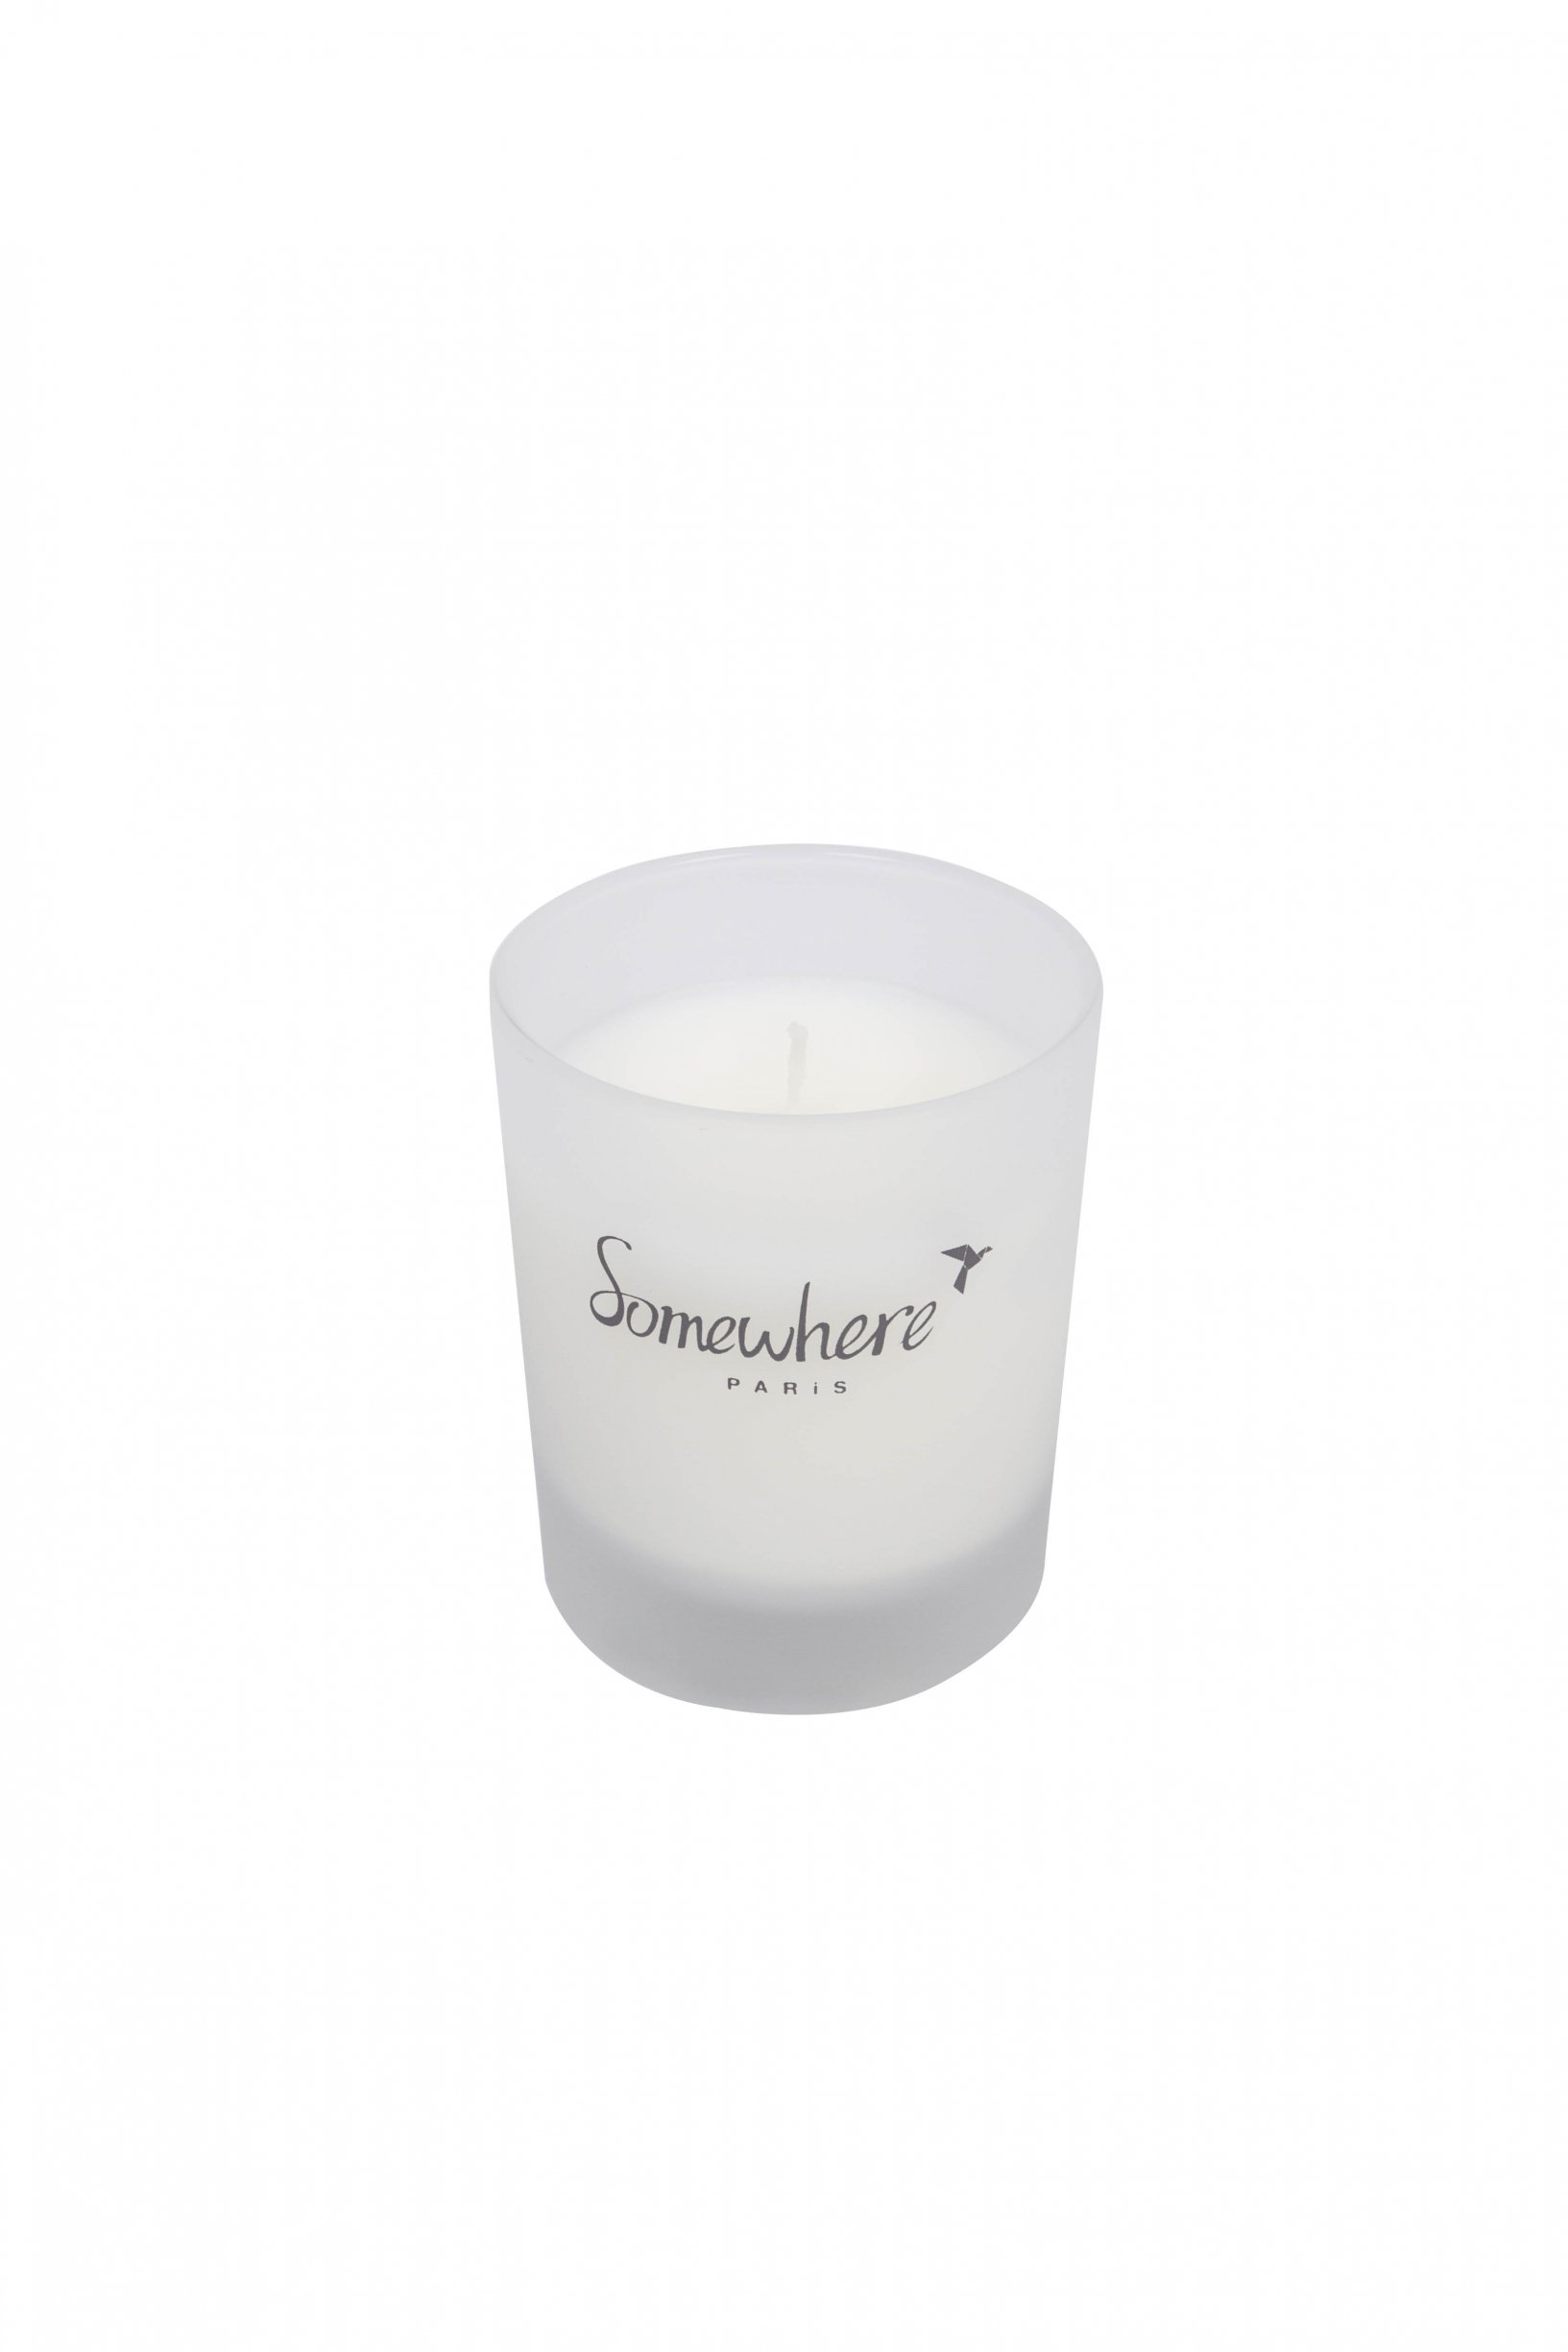 Somewhere candle